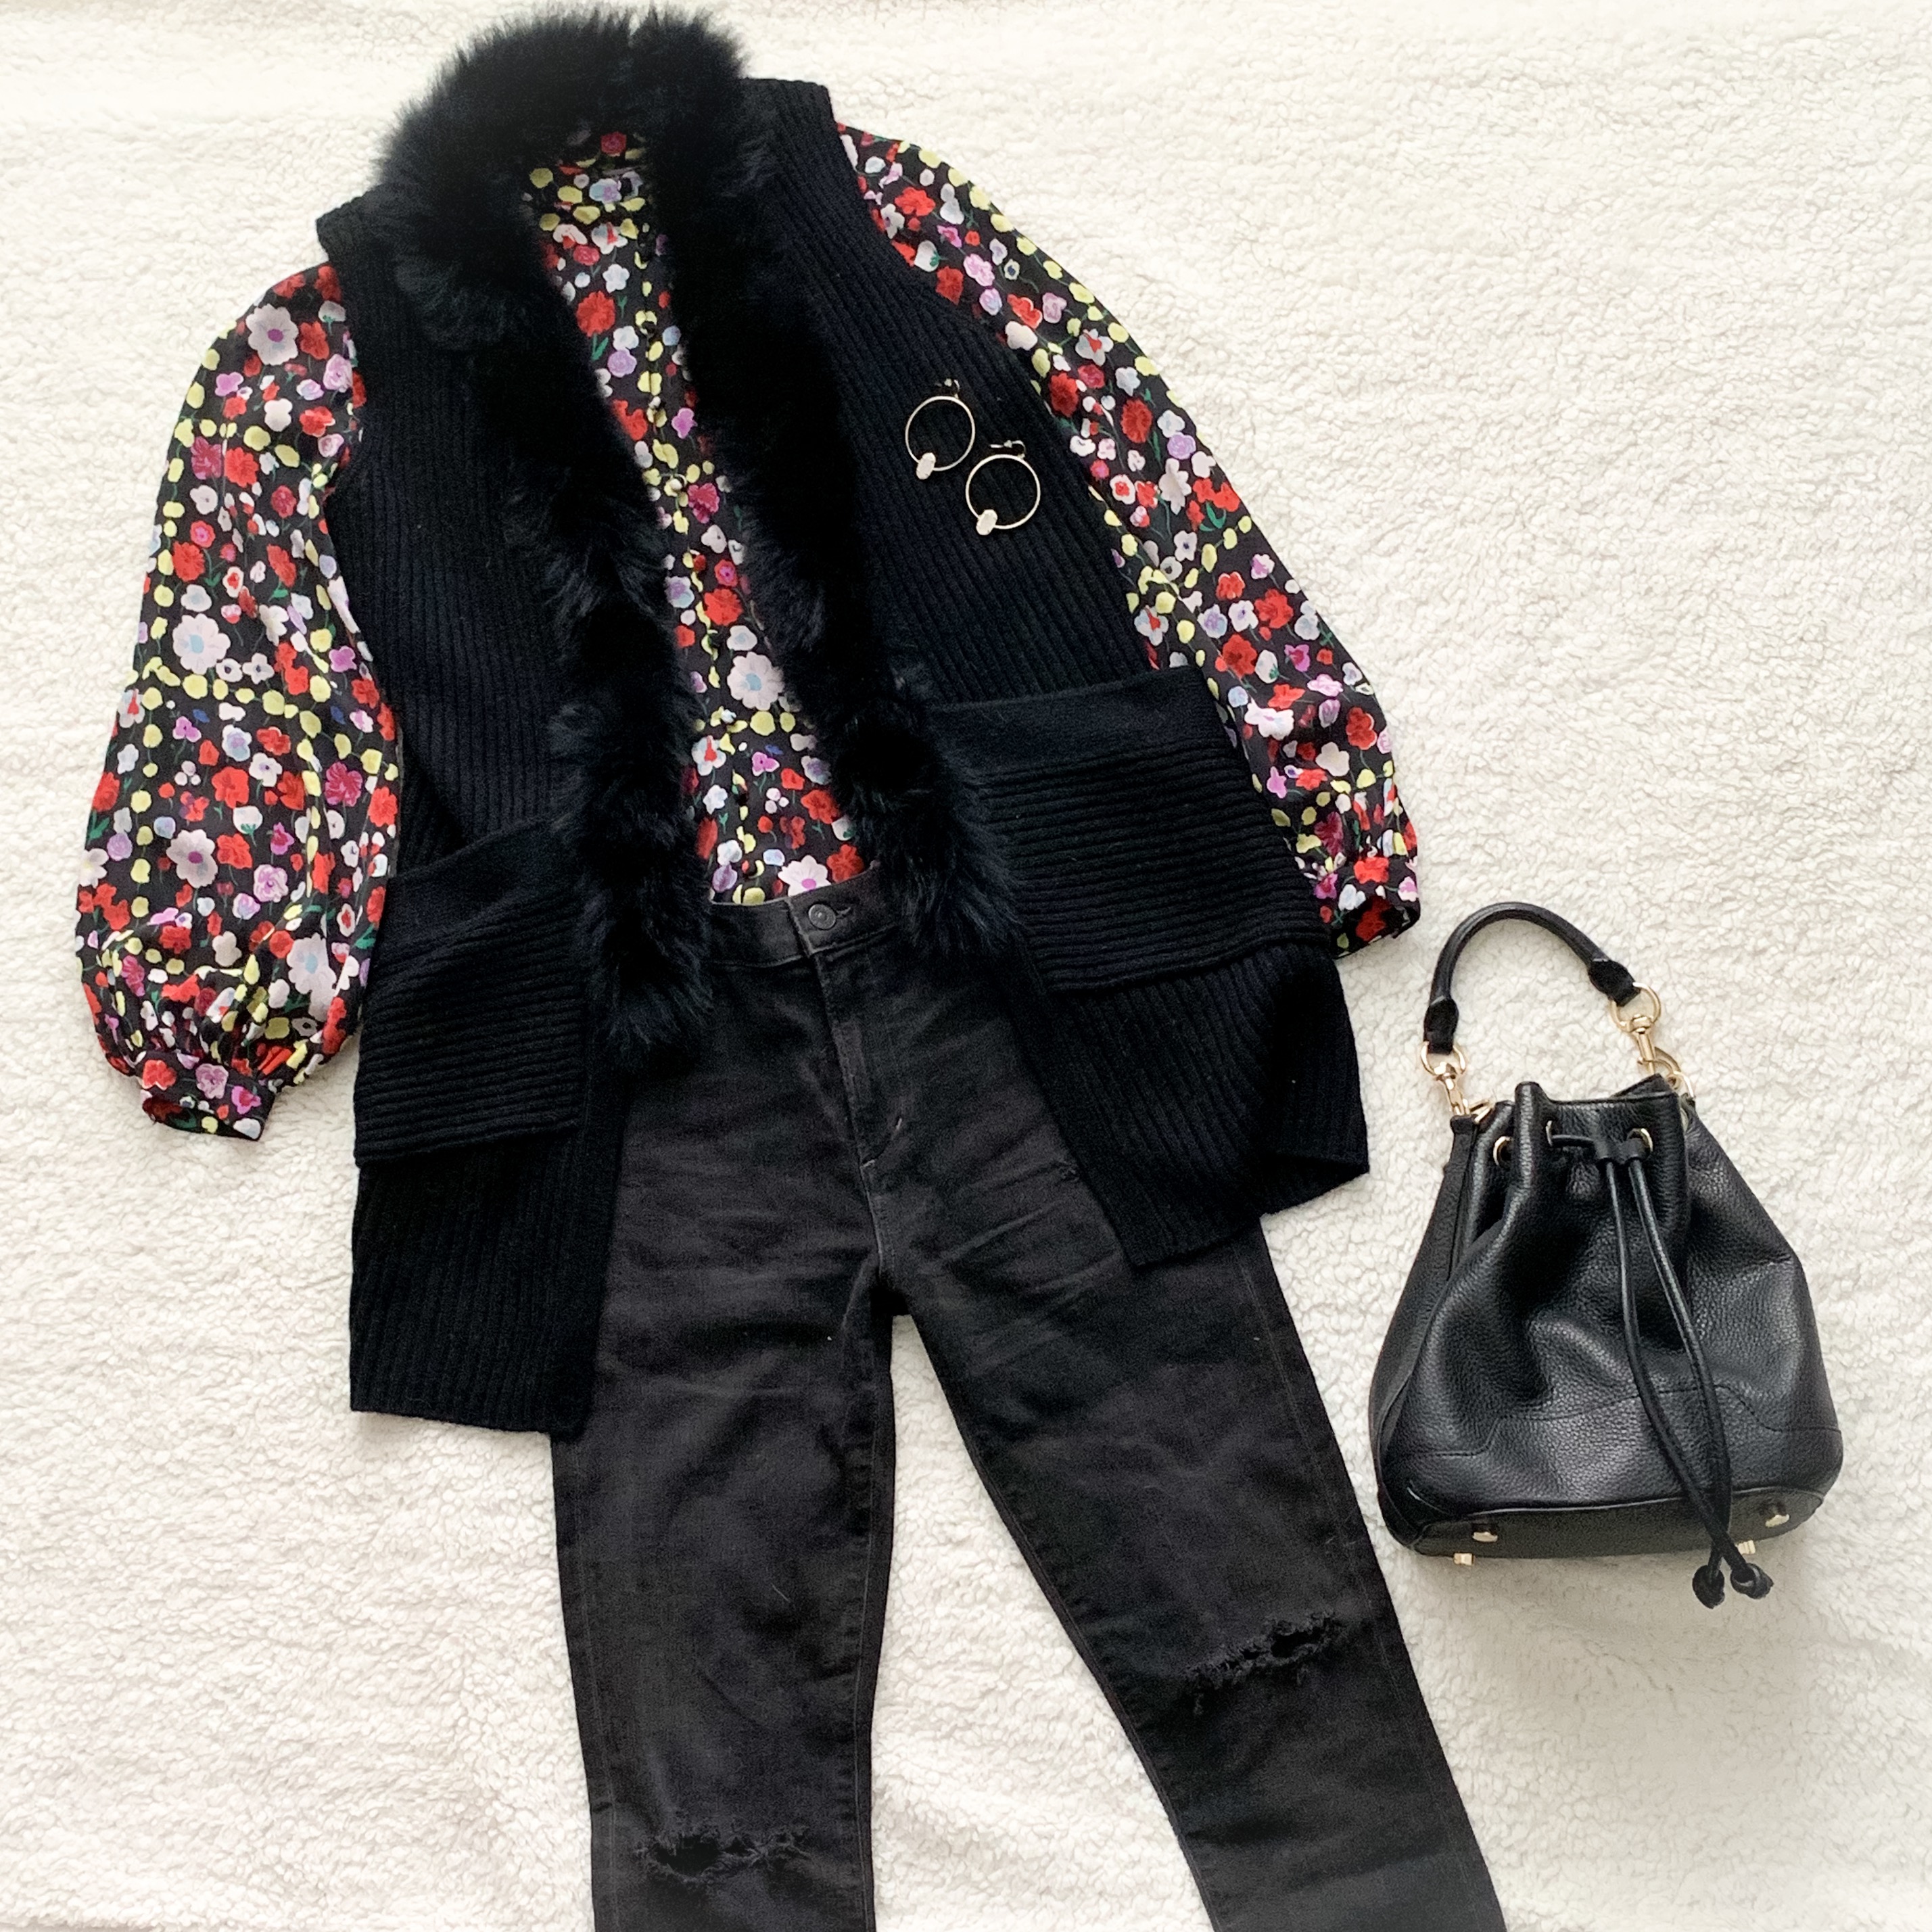 Chicago Stylist, Style Consultant, Styling Tip, Floral Top, Distressed Jeans, Faux Fur Vest